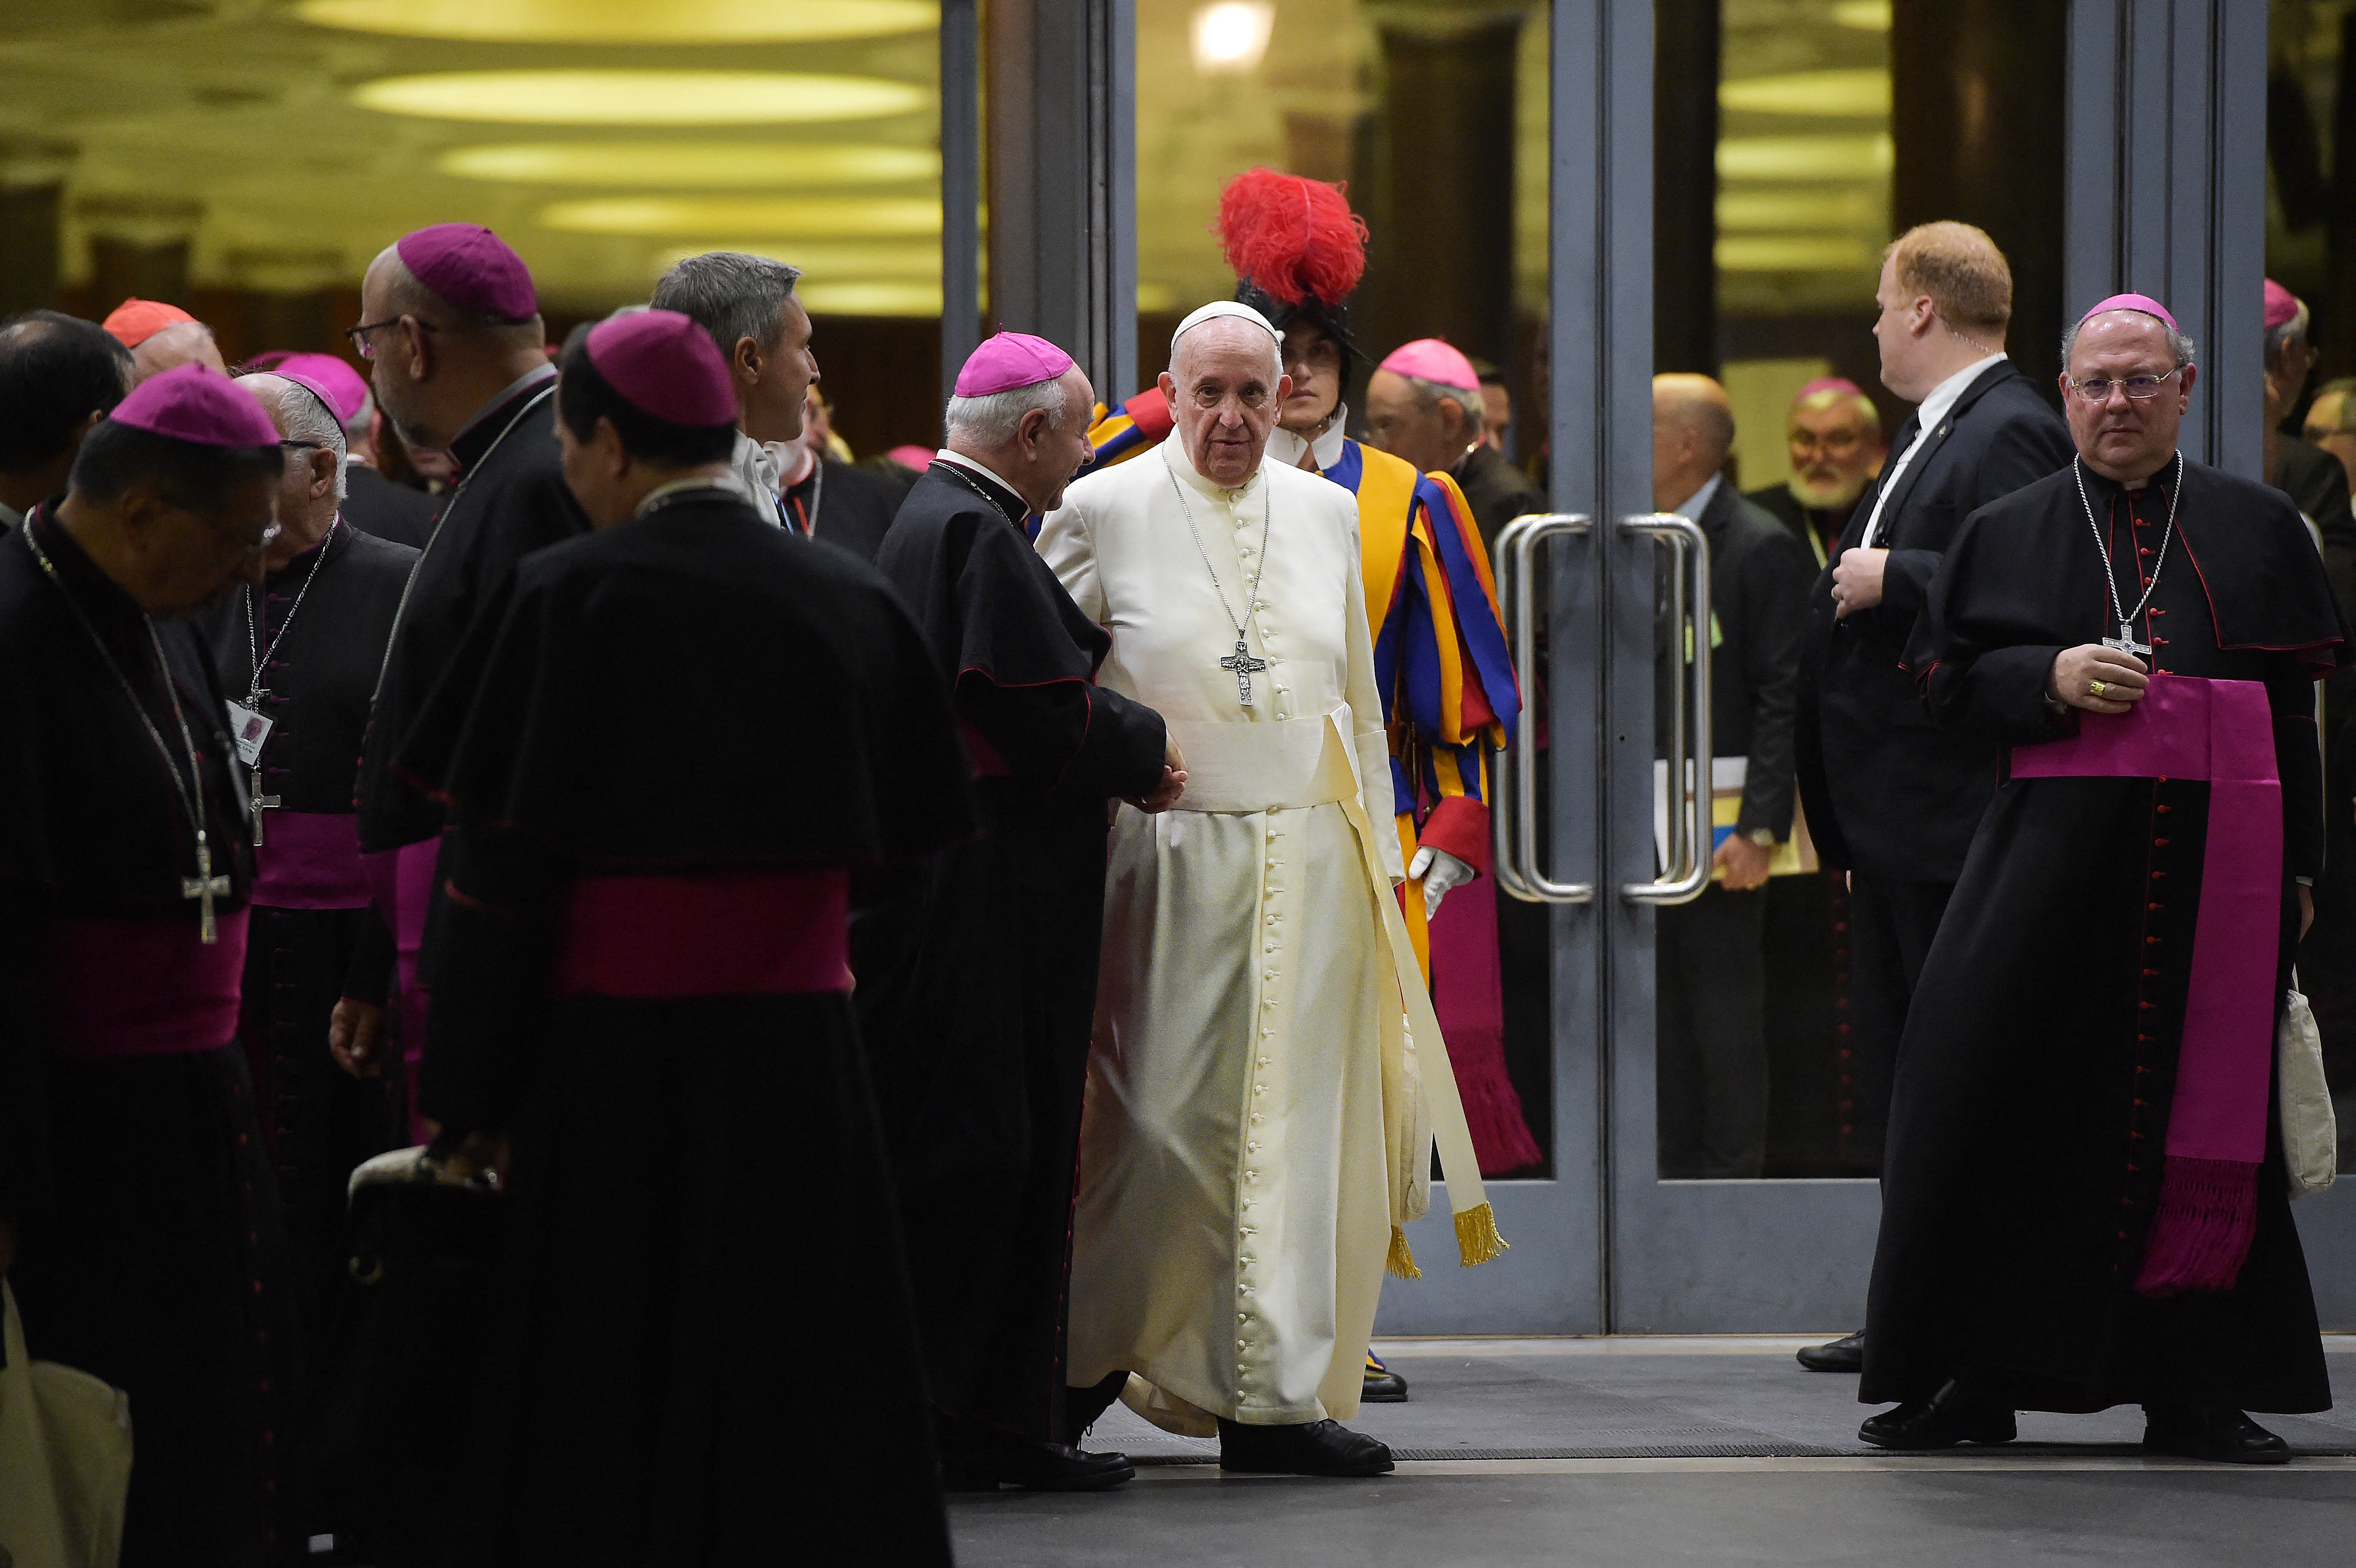 Don't leave God 'out in the cold', says Pope